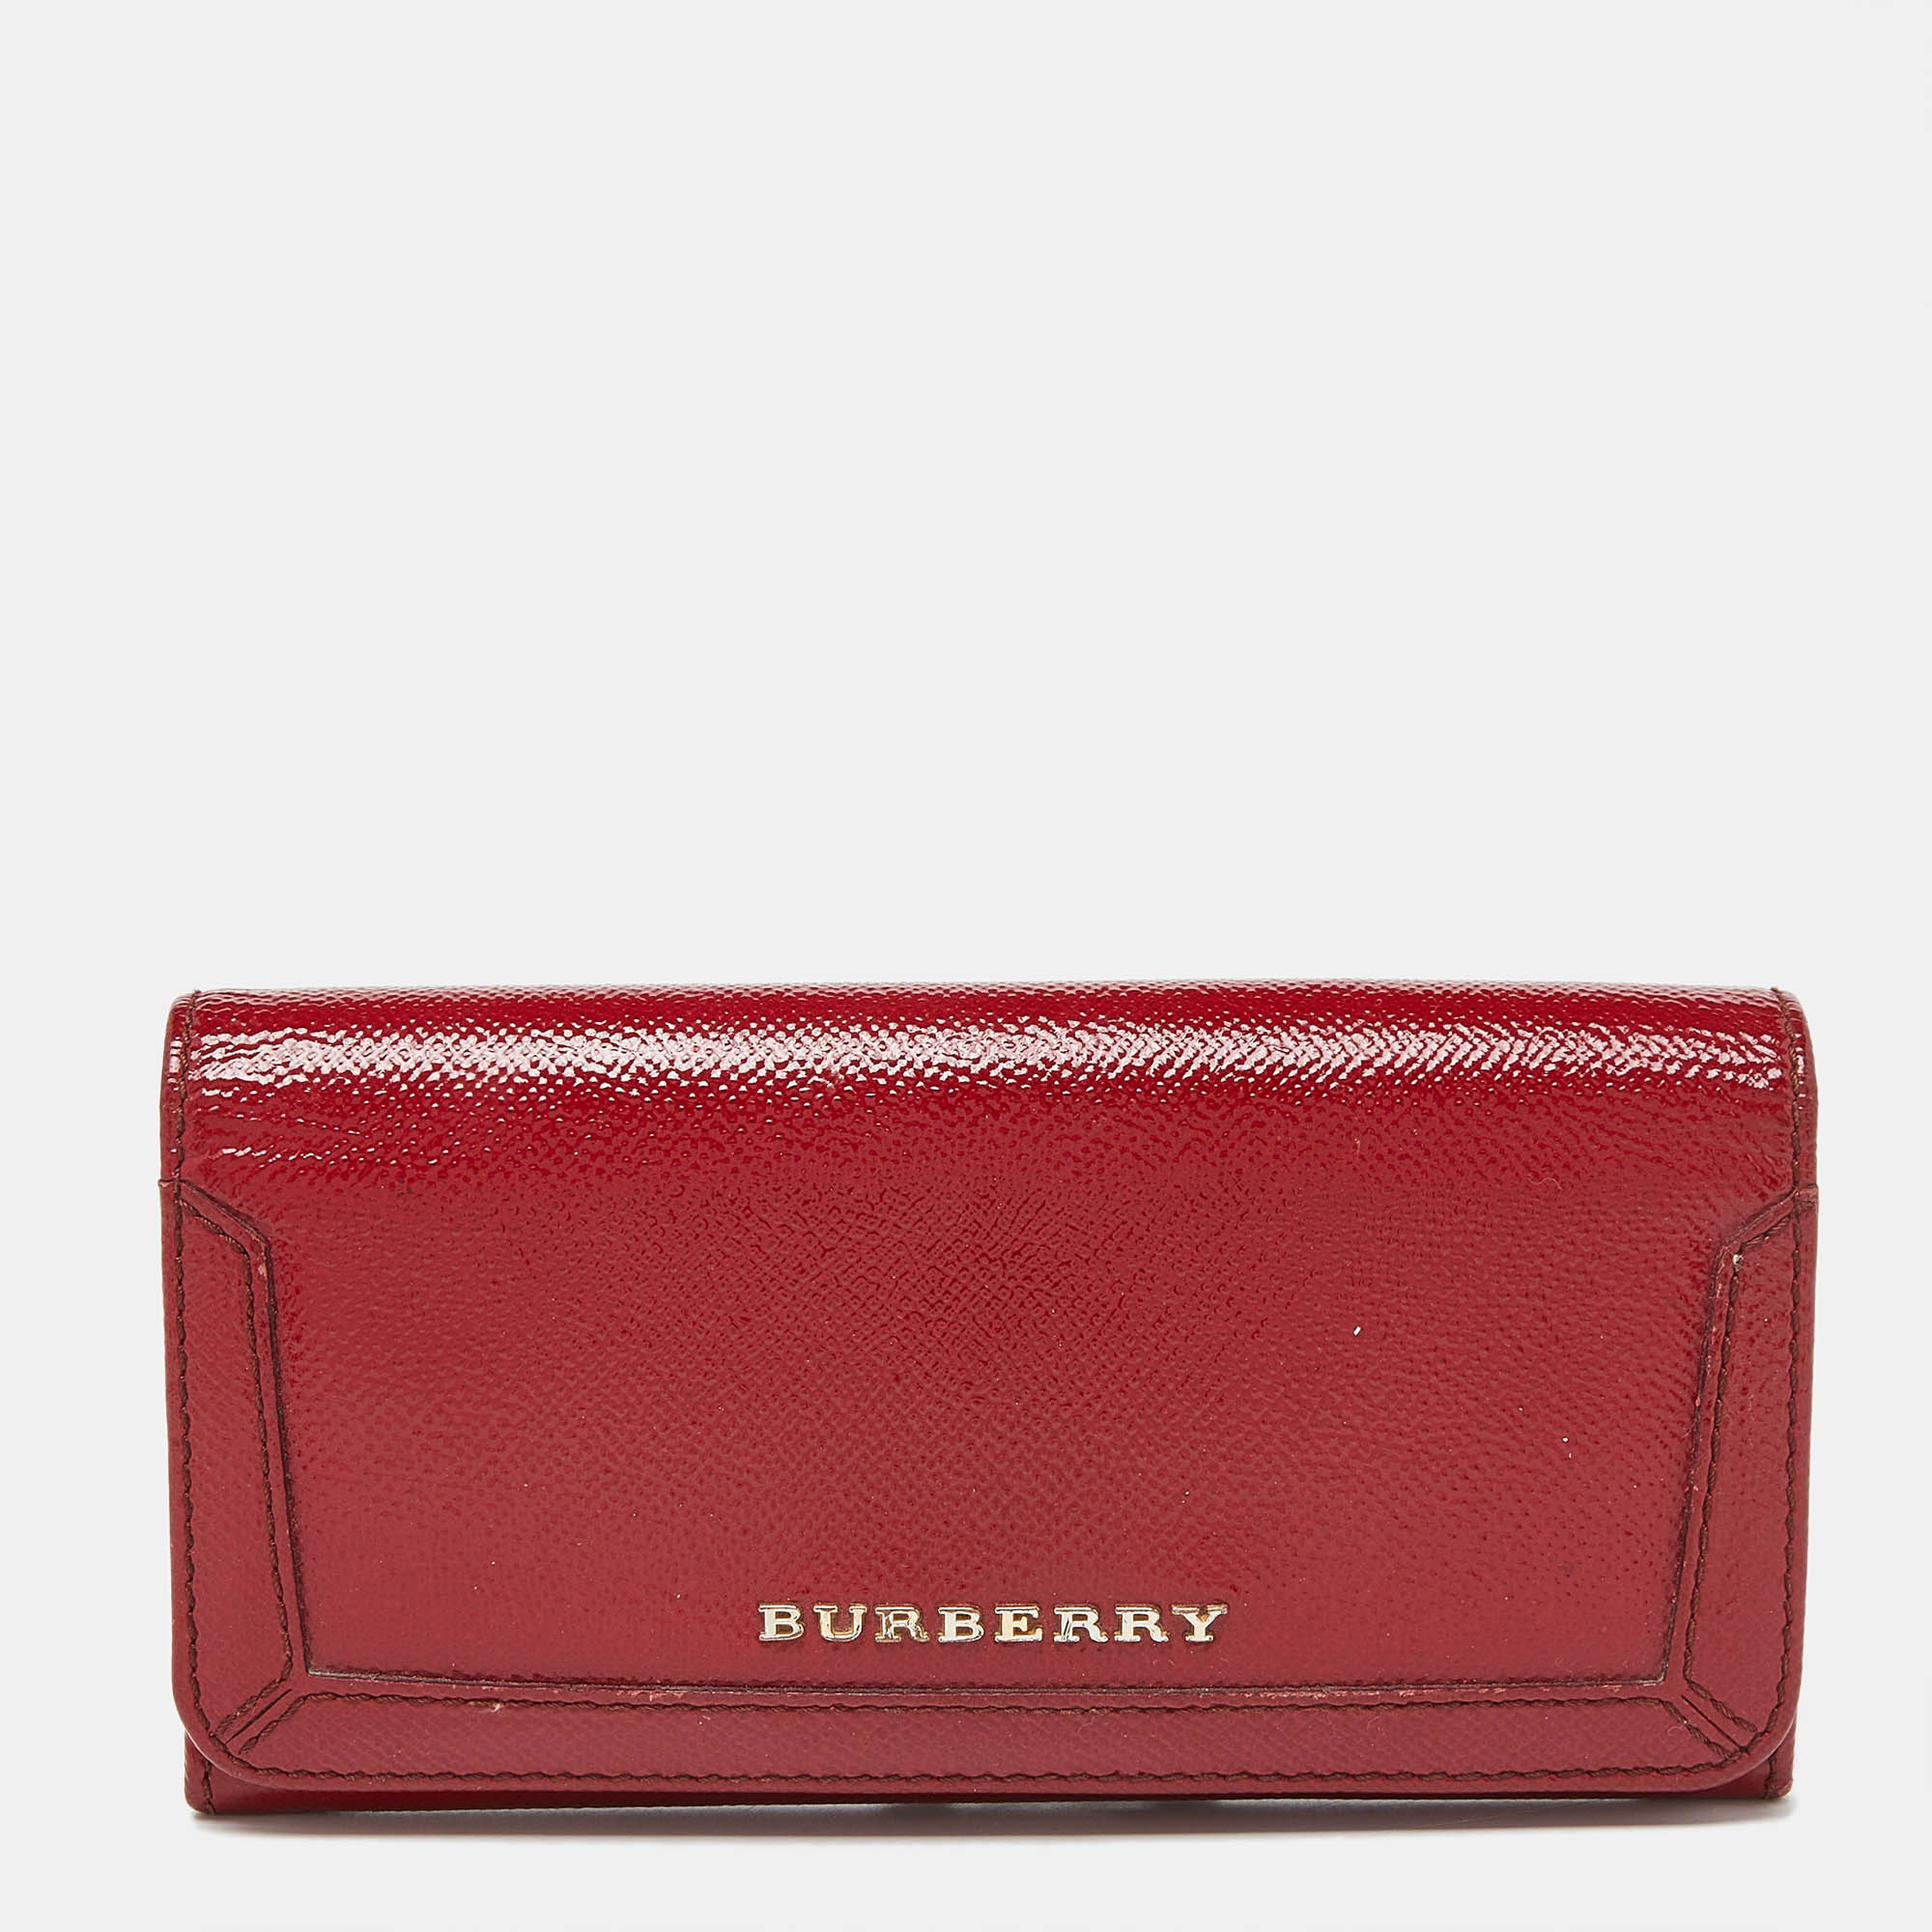 

Burberry Red Patent Leather Flap Continental Wallet